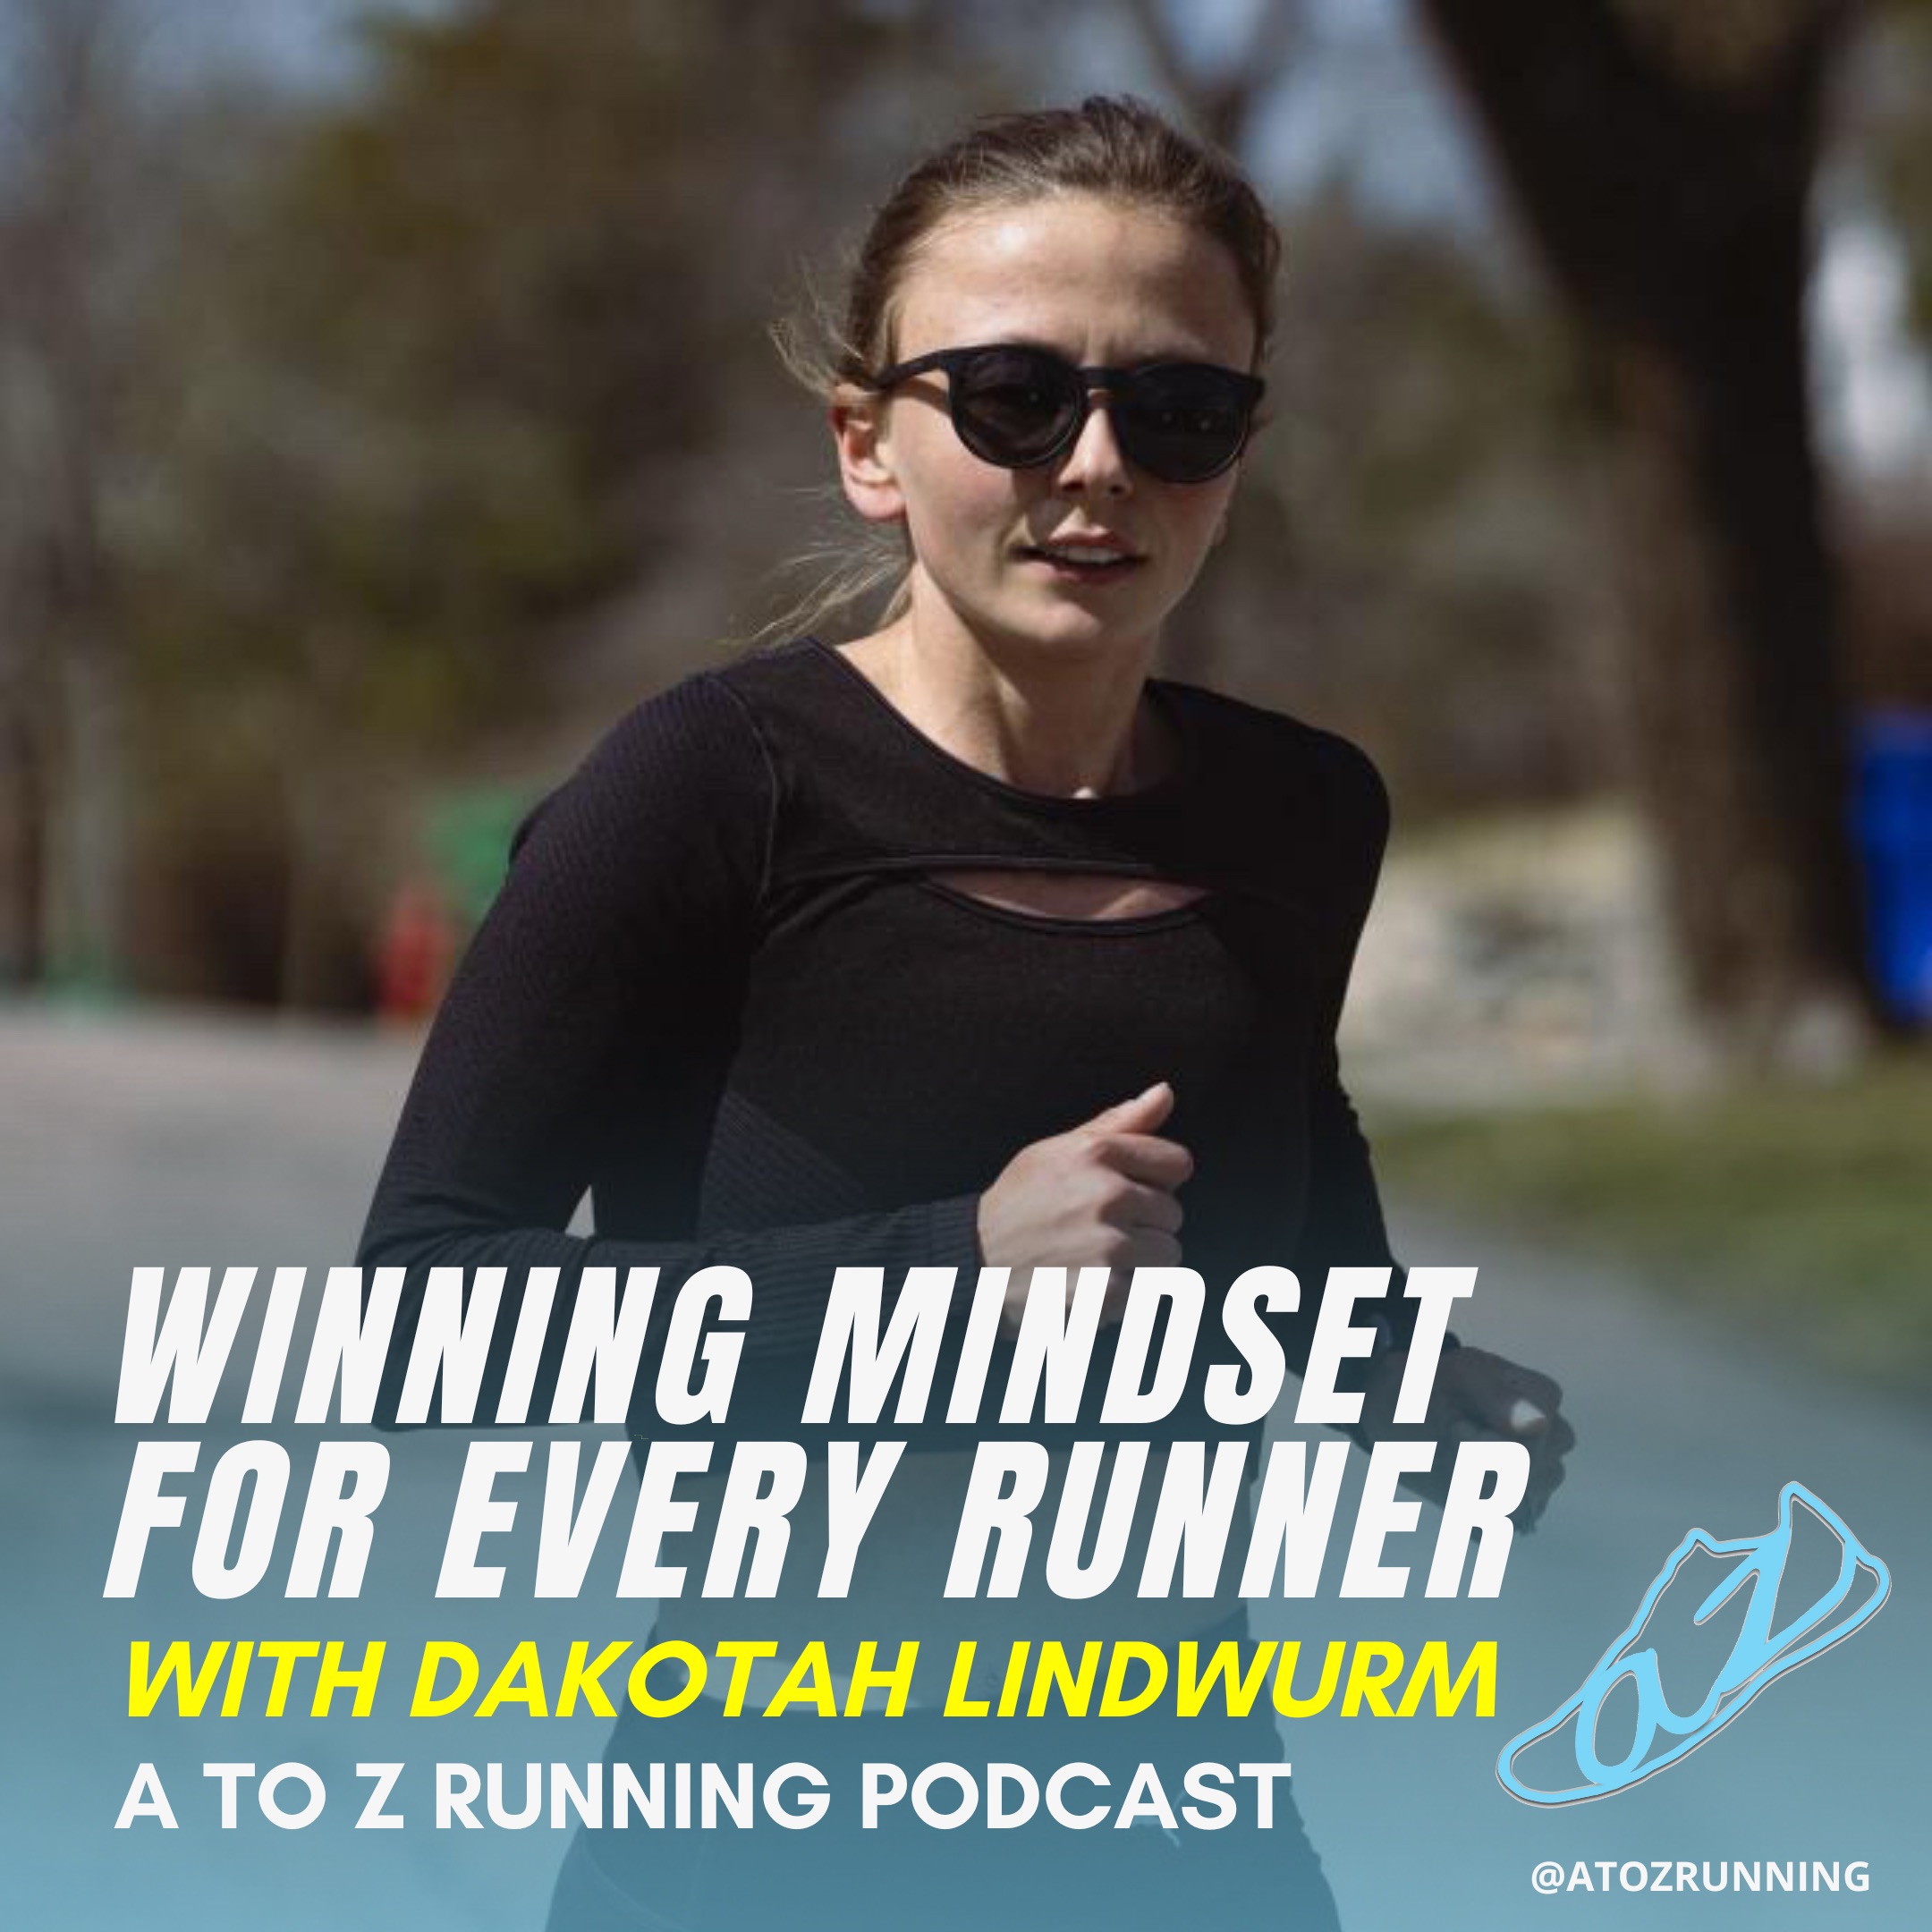 dakotah lindwurm running with sunglasses. words say winning mindset for every runner by the A to Z Running Podcast